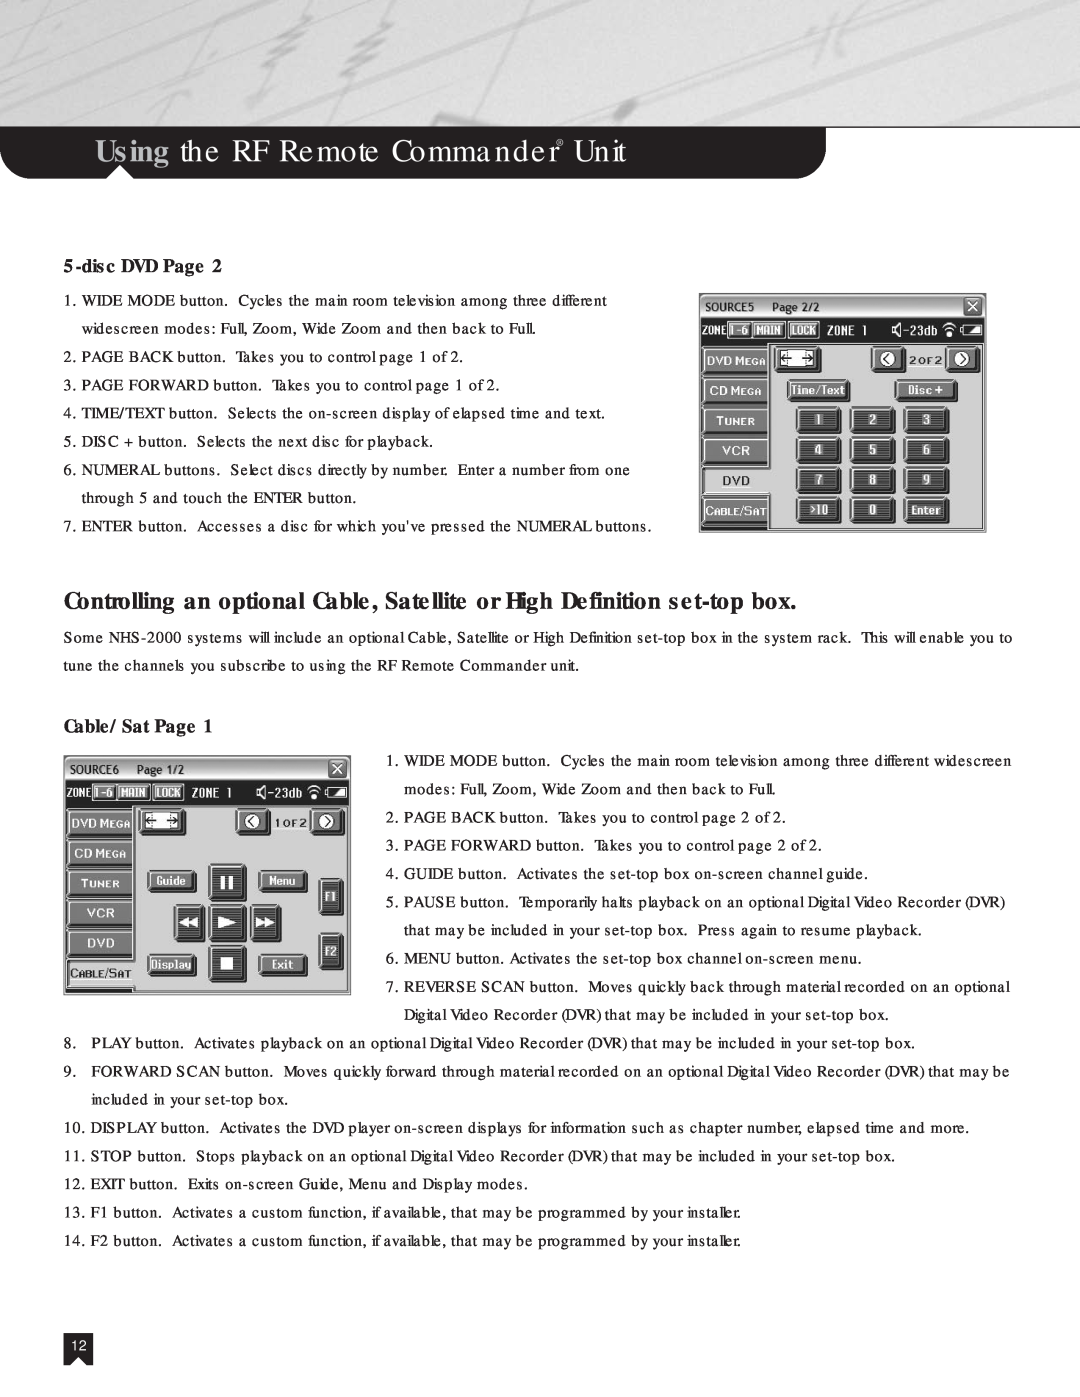 Sony NHS-2000 manual Cable/Sat Page, Using the RF Remote Commander Unit, discDVD Page 